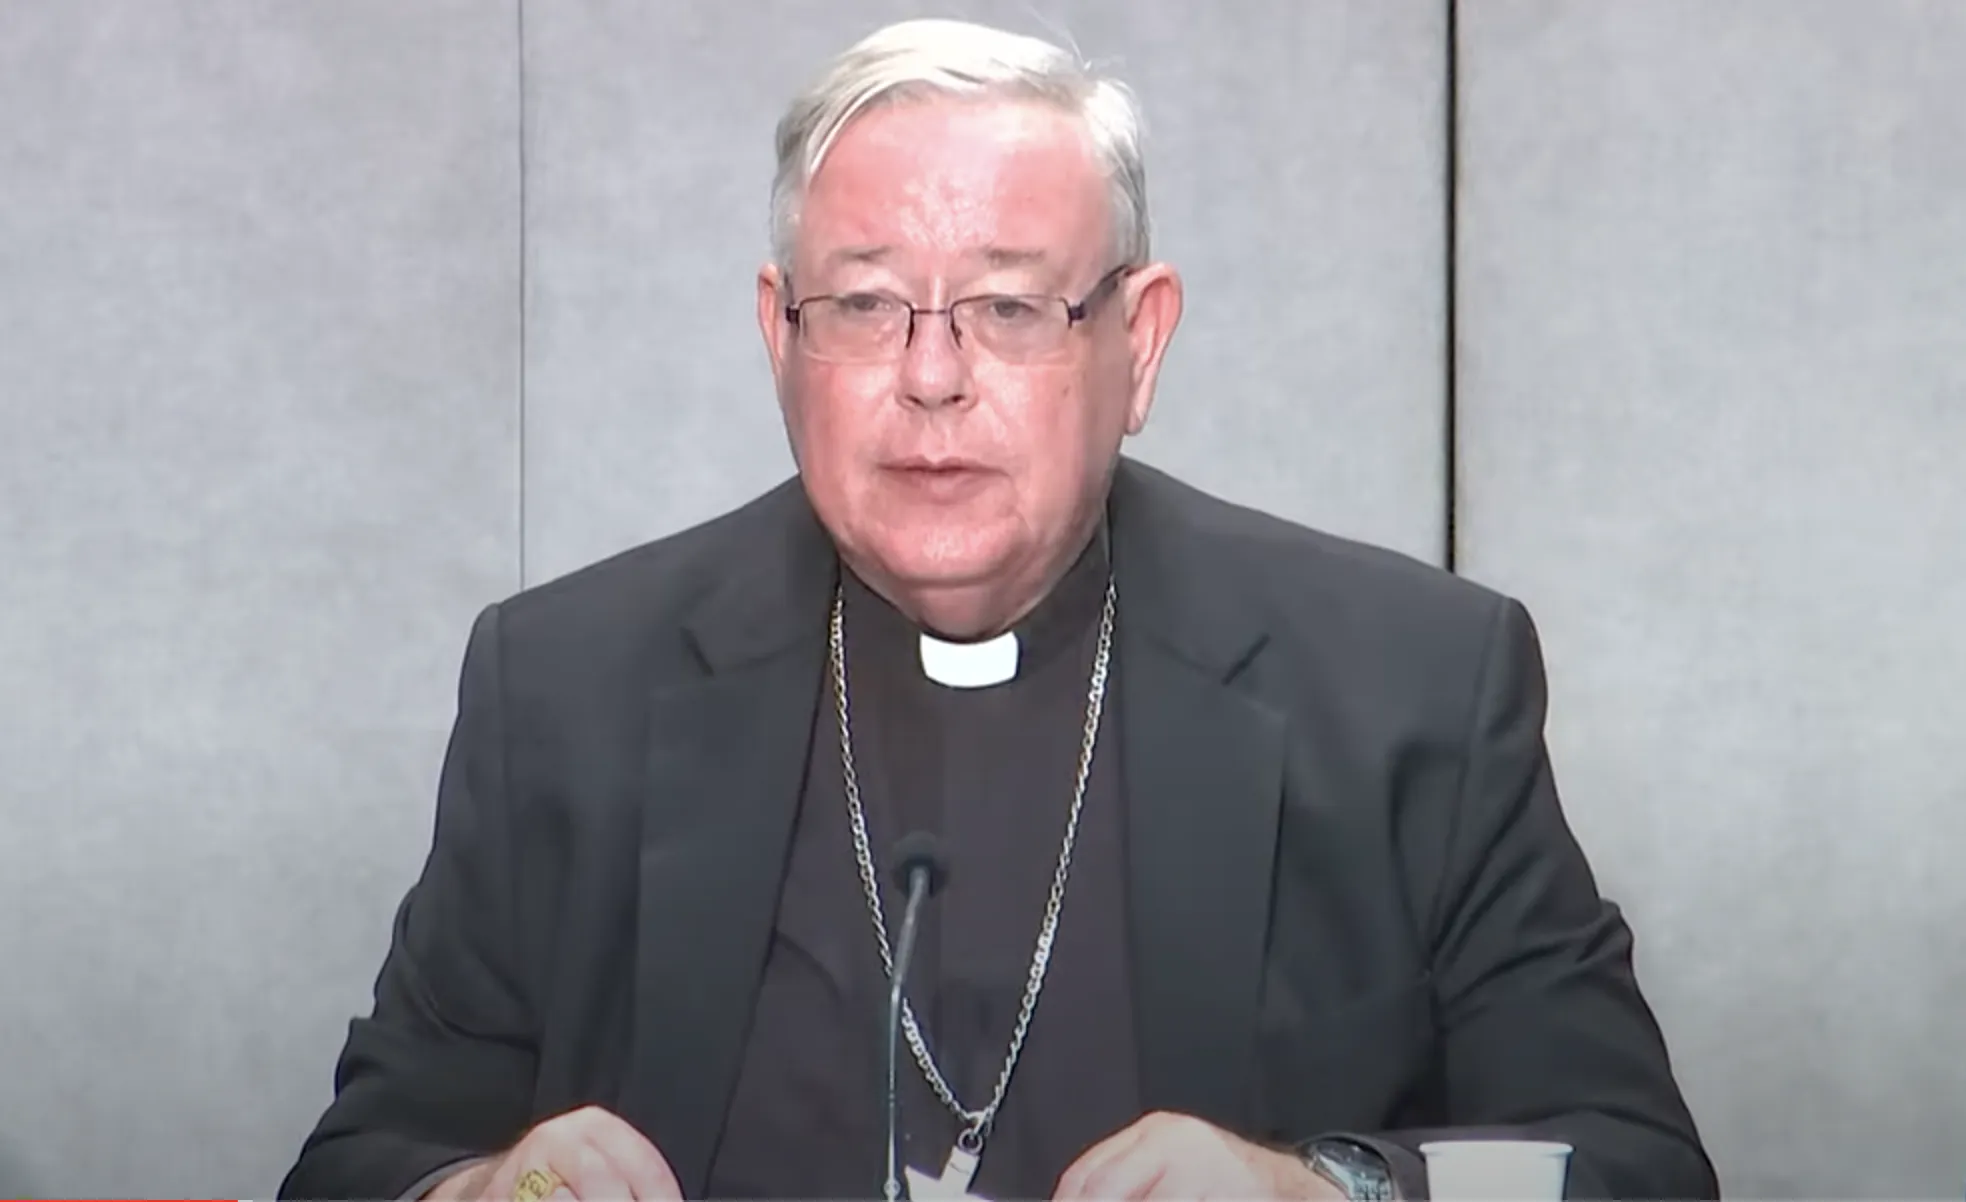 Cardinal Jean-Claude Hollerich, S.J., Archbishop of Luxembourg, speaks at a Vatican press conference, Aug. 26, 2022?w=200&h=150